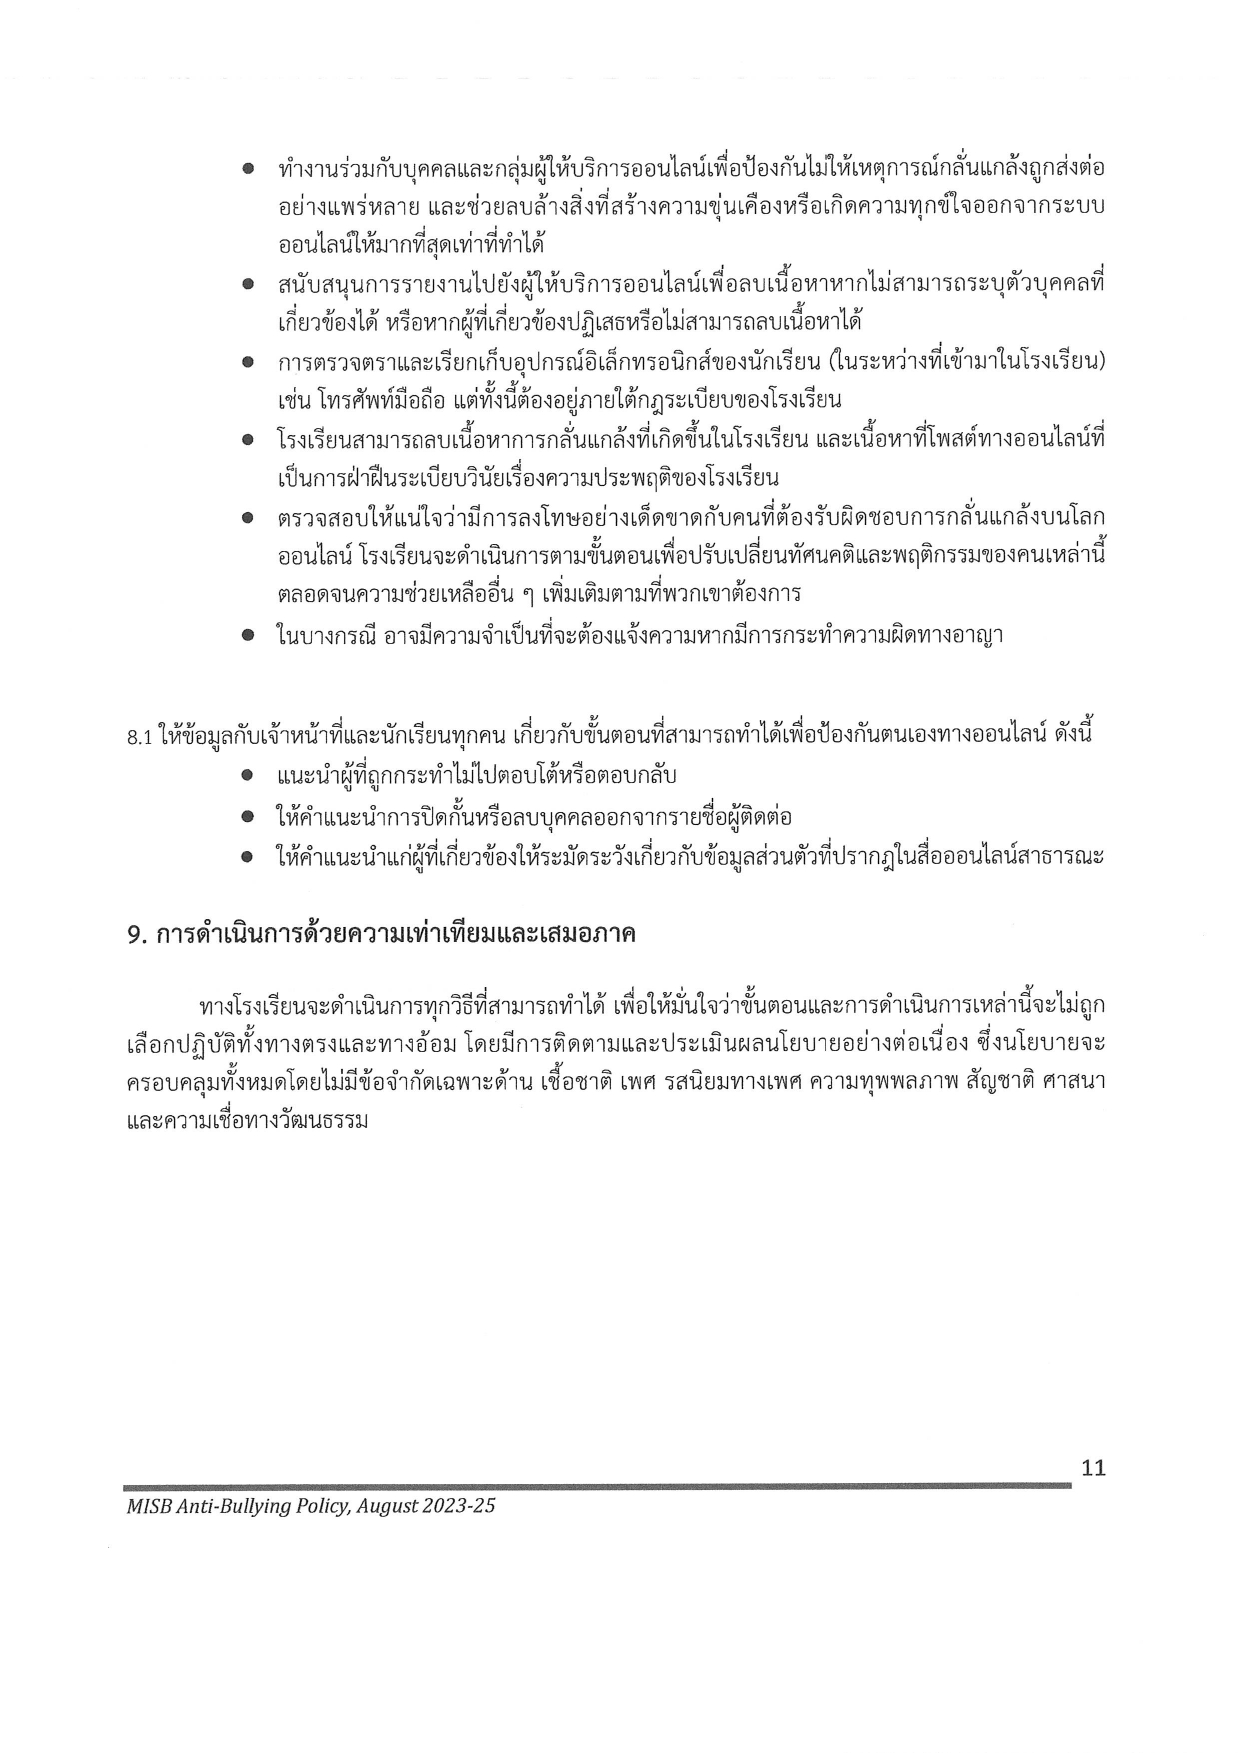 Anti Bullying Policy 2023 2025 Thai page 0013